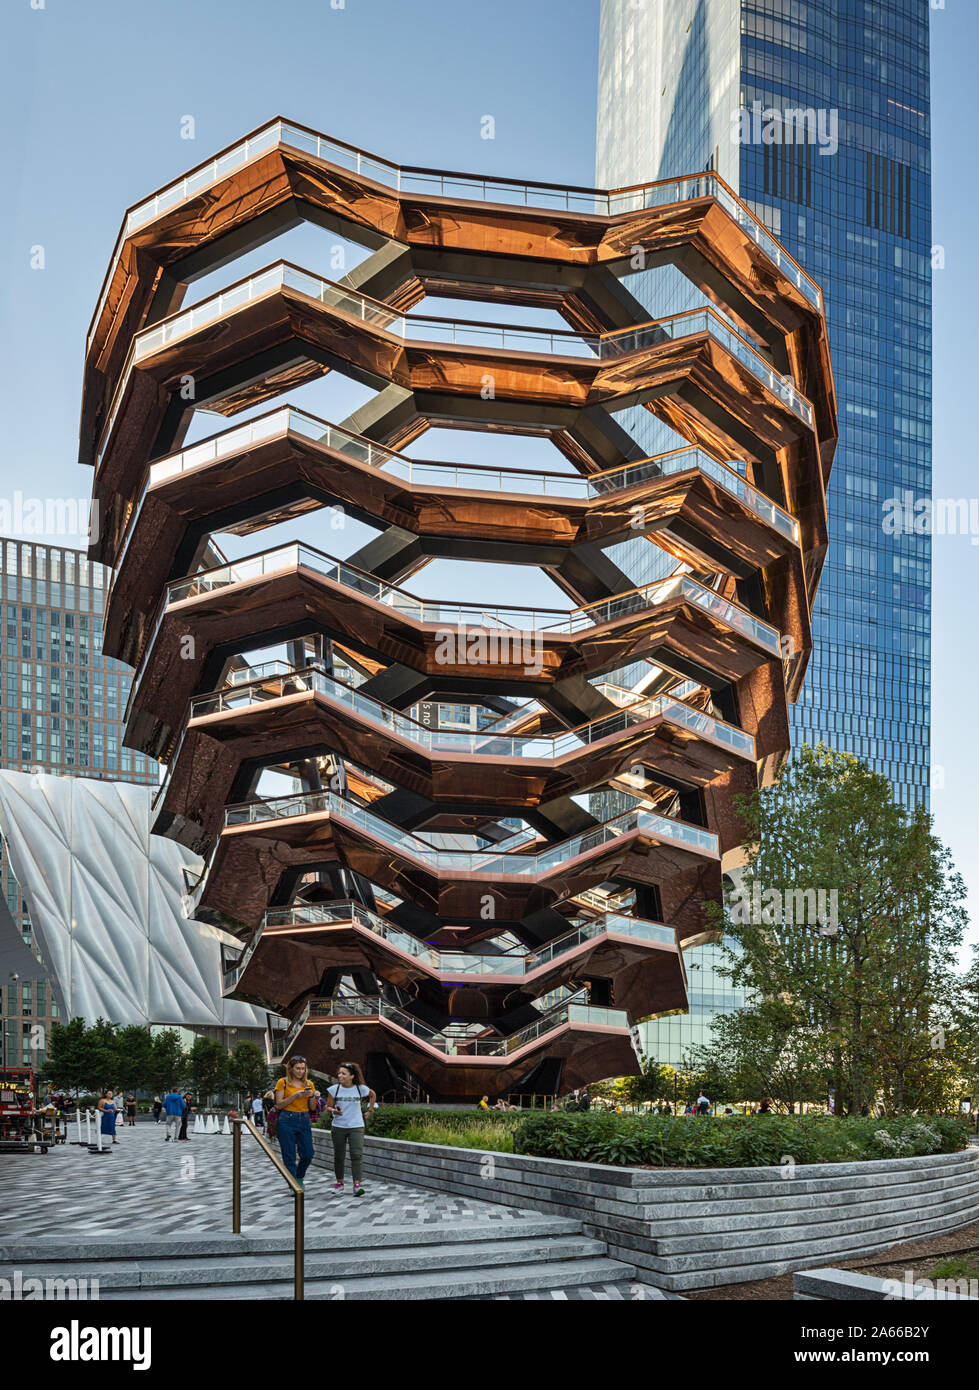 The Vessel at Hudson Yards in New York designed by Thomas Heatherwick. An interactive, spiral staircase artwork. Stock Photo